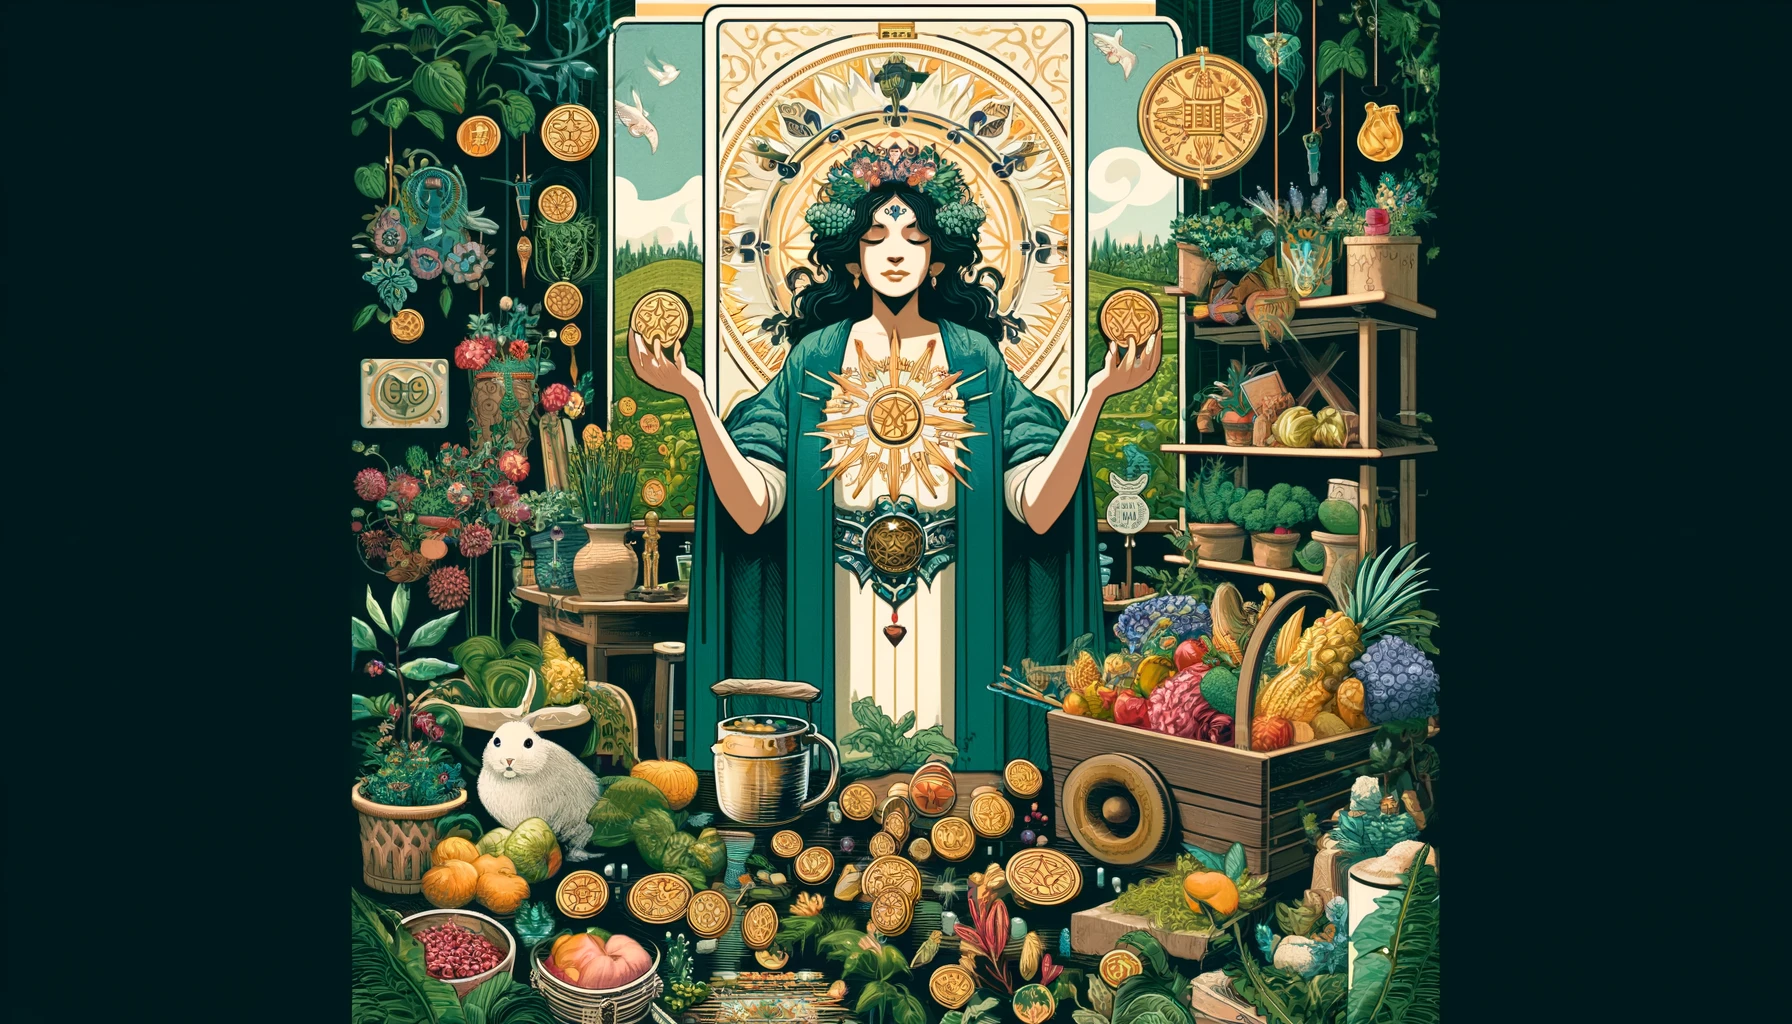 The image depicts a woman seated on a throne adorned with earthy elements such as flowers, vines, and fruits. She exudes an aura of nurturing warmth and practical wisdom, with a gentle yet confident demeanor. Her surroundings suggest abundance and fertility, reflecting her grounded and nurturing nature. This visualization vividly captures the essence of the Queen of Pentacles as a symbol of stability, care, and pragmatic wisdom.